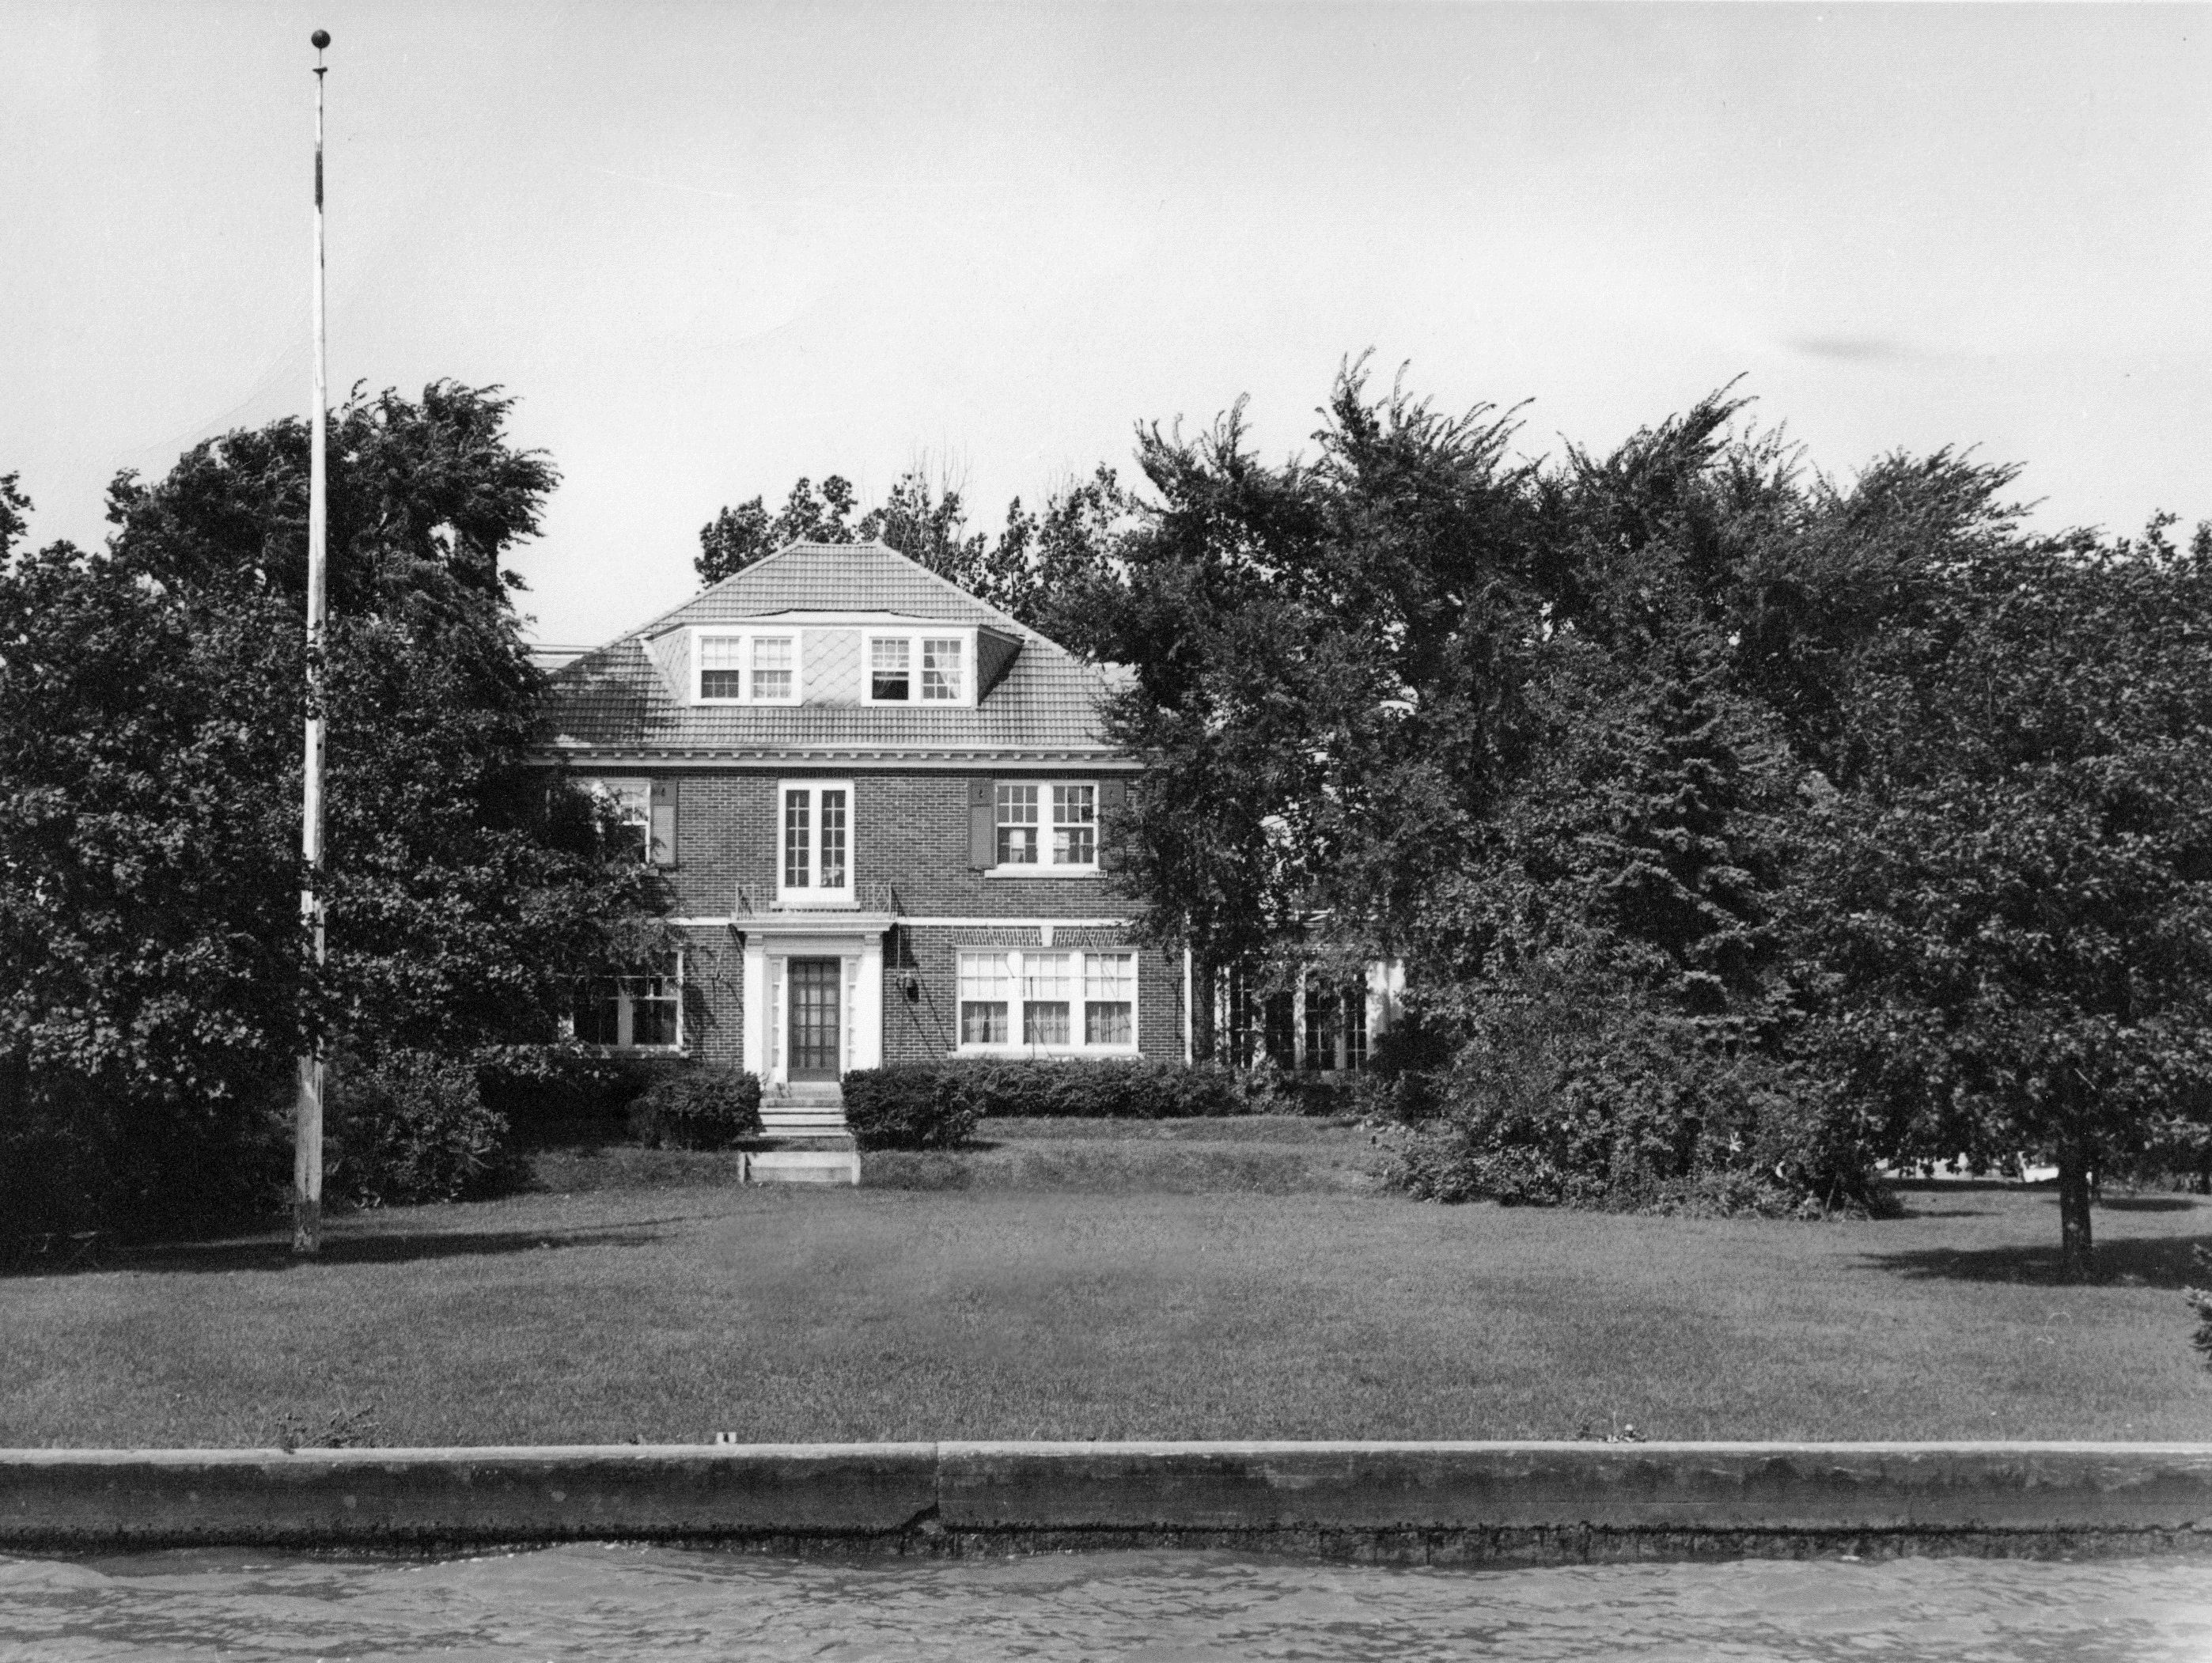 Home of William Thorp on Detroit River 1948